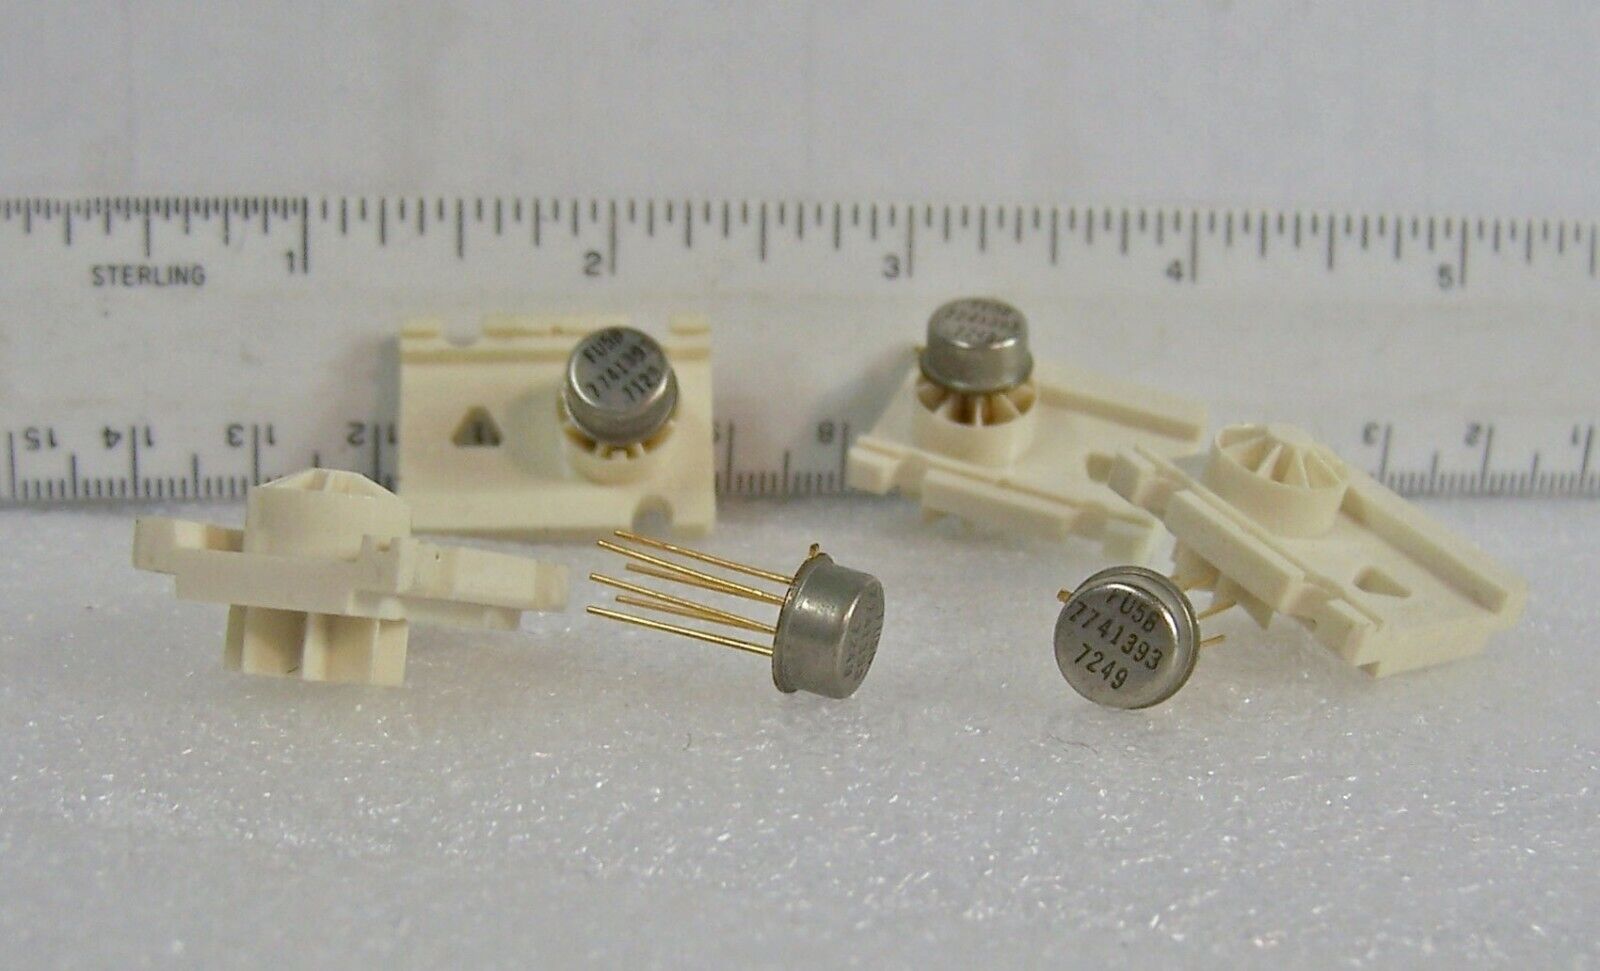 LOT OF 4 SIEMENS FU5B 7741393 OPERATIONAL AMPLIFIERS GOLD LEADS  (VINTAGE NOS)